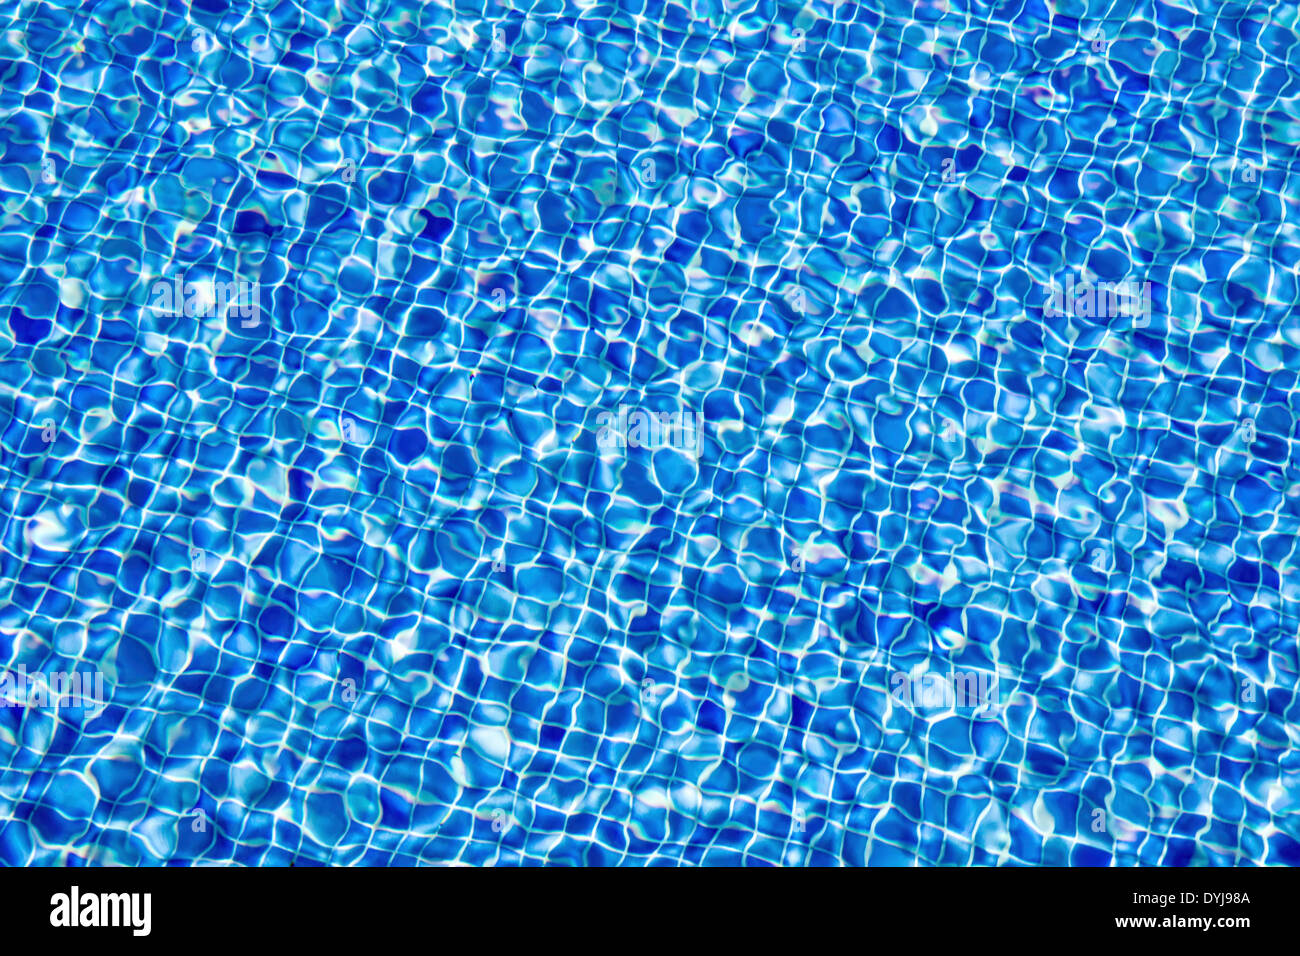 Clear blue tiled water Stock Photo